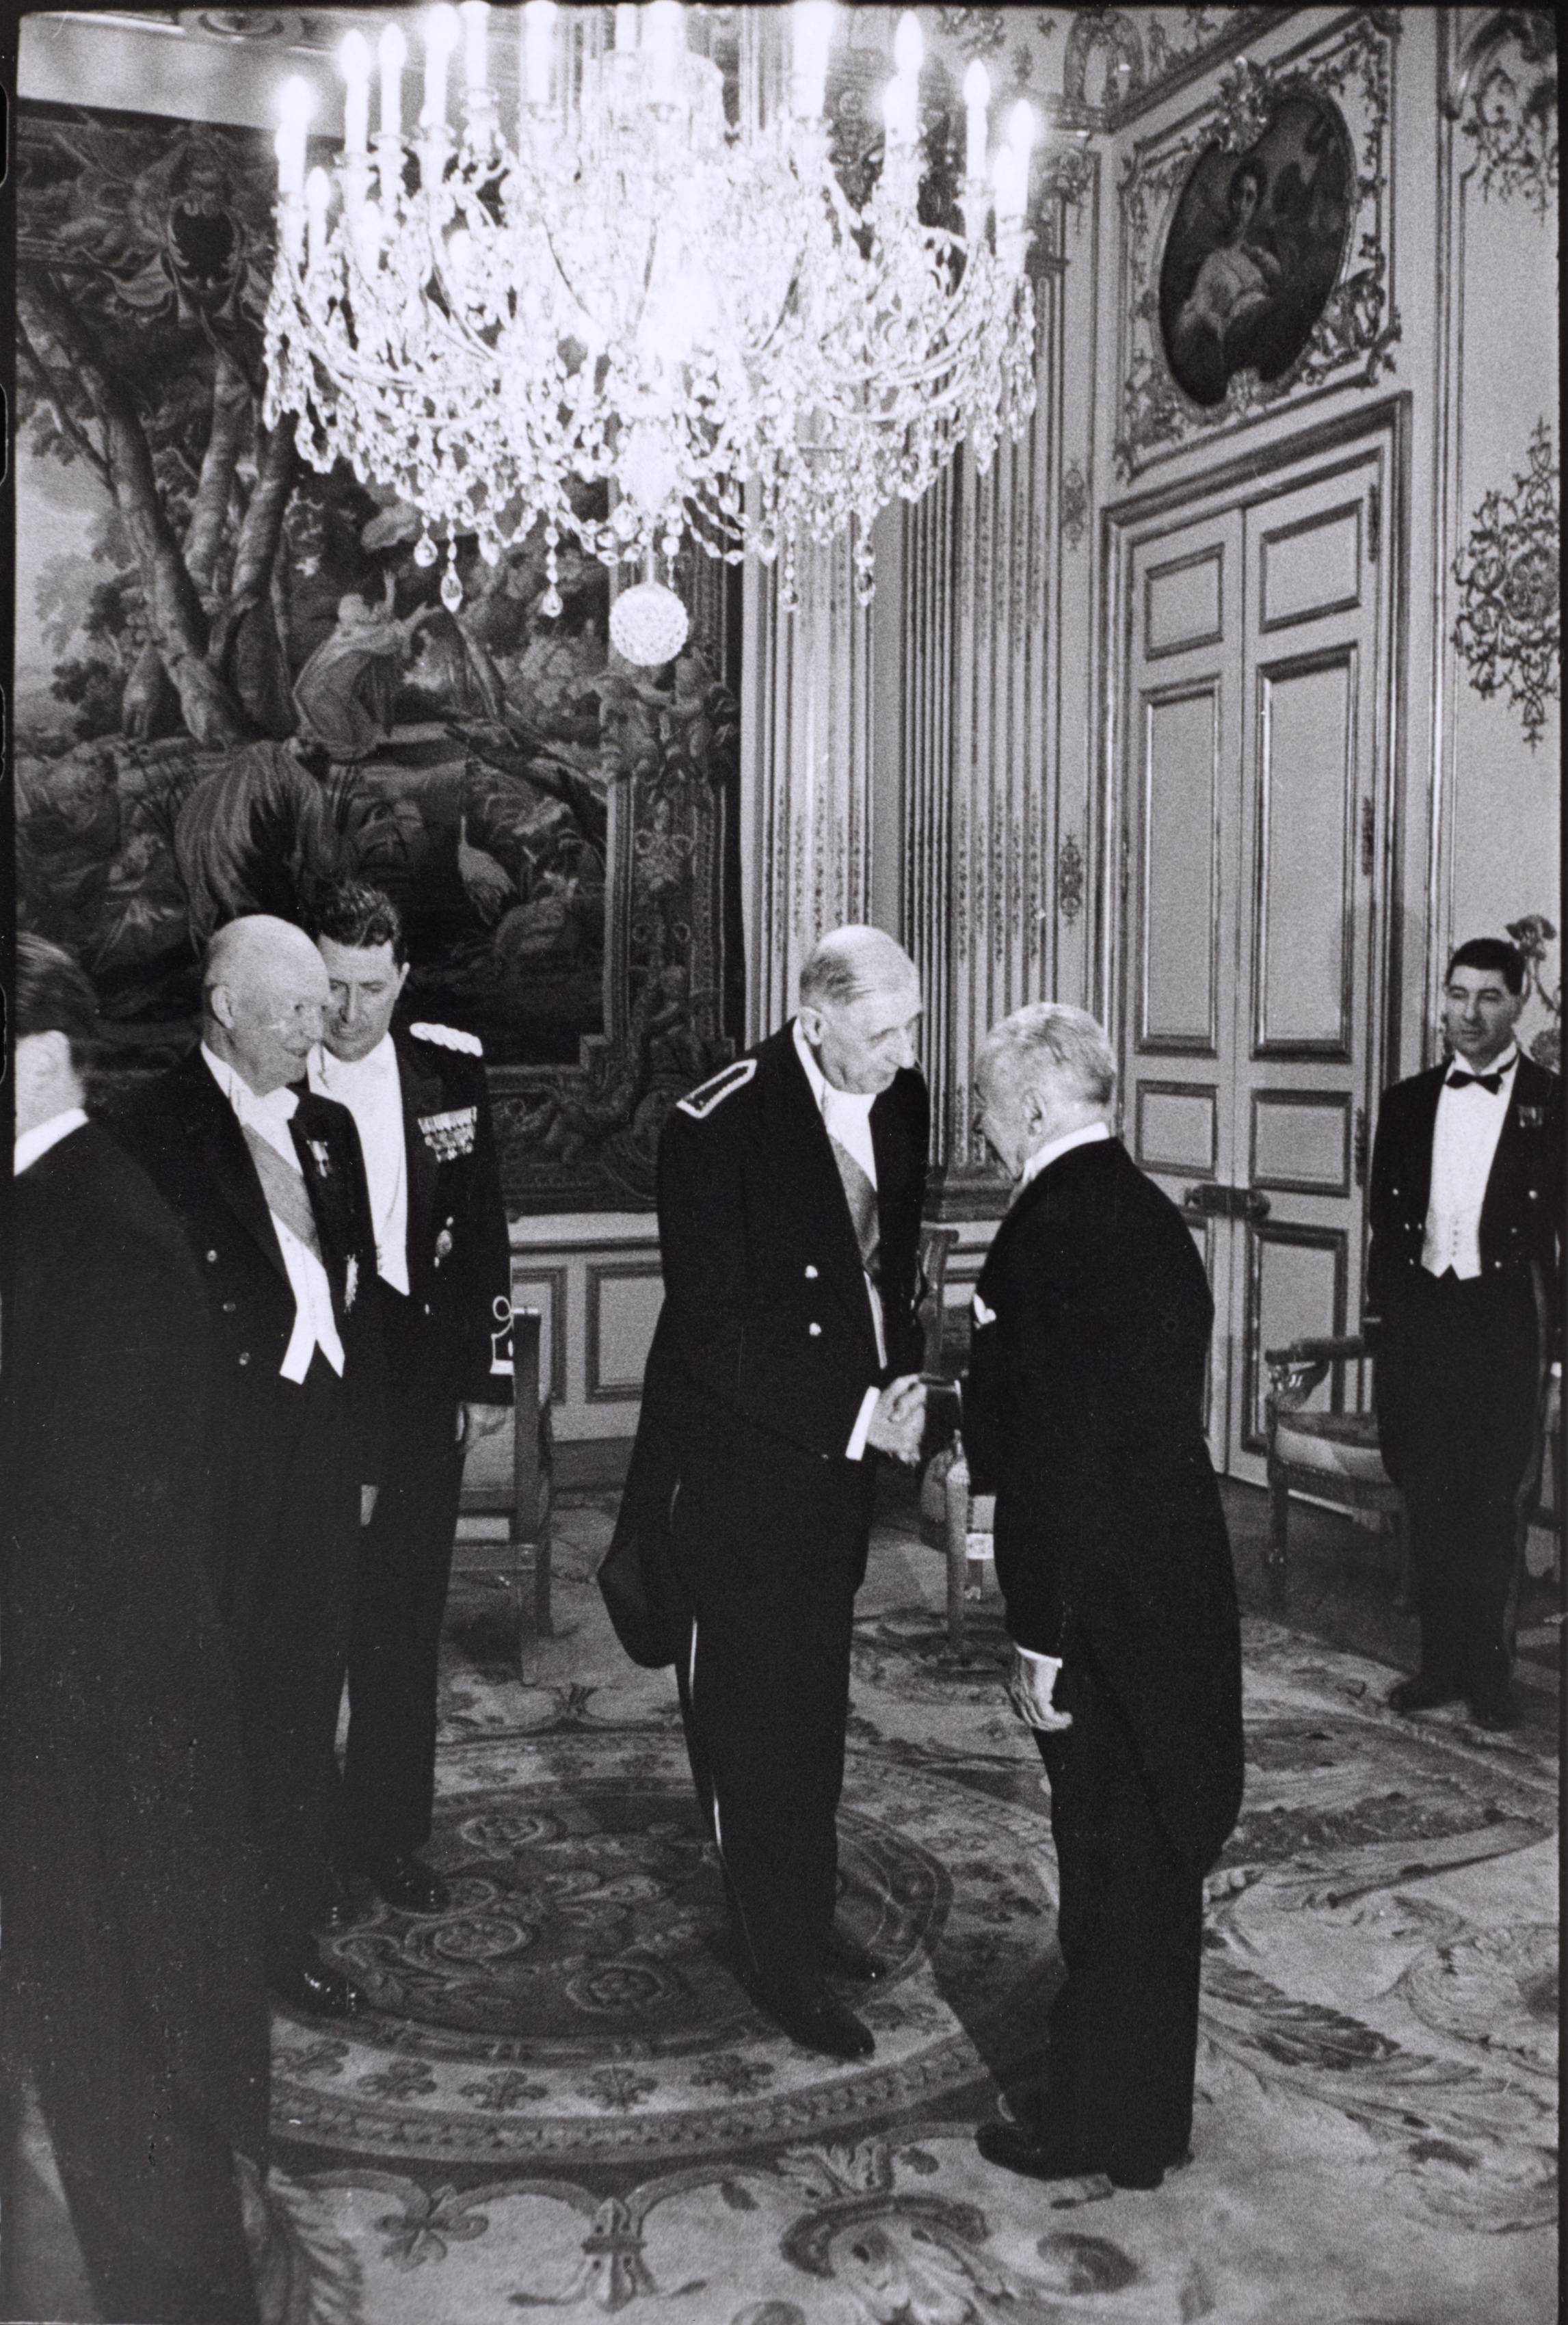 President Dwight D. Eisenhower and Charles de Gaulle greeting guests